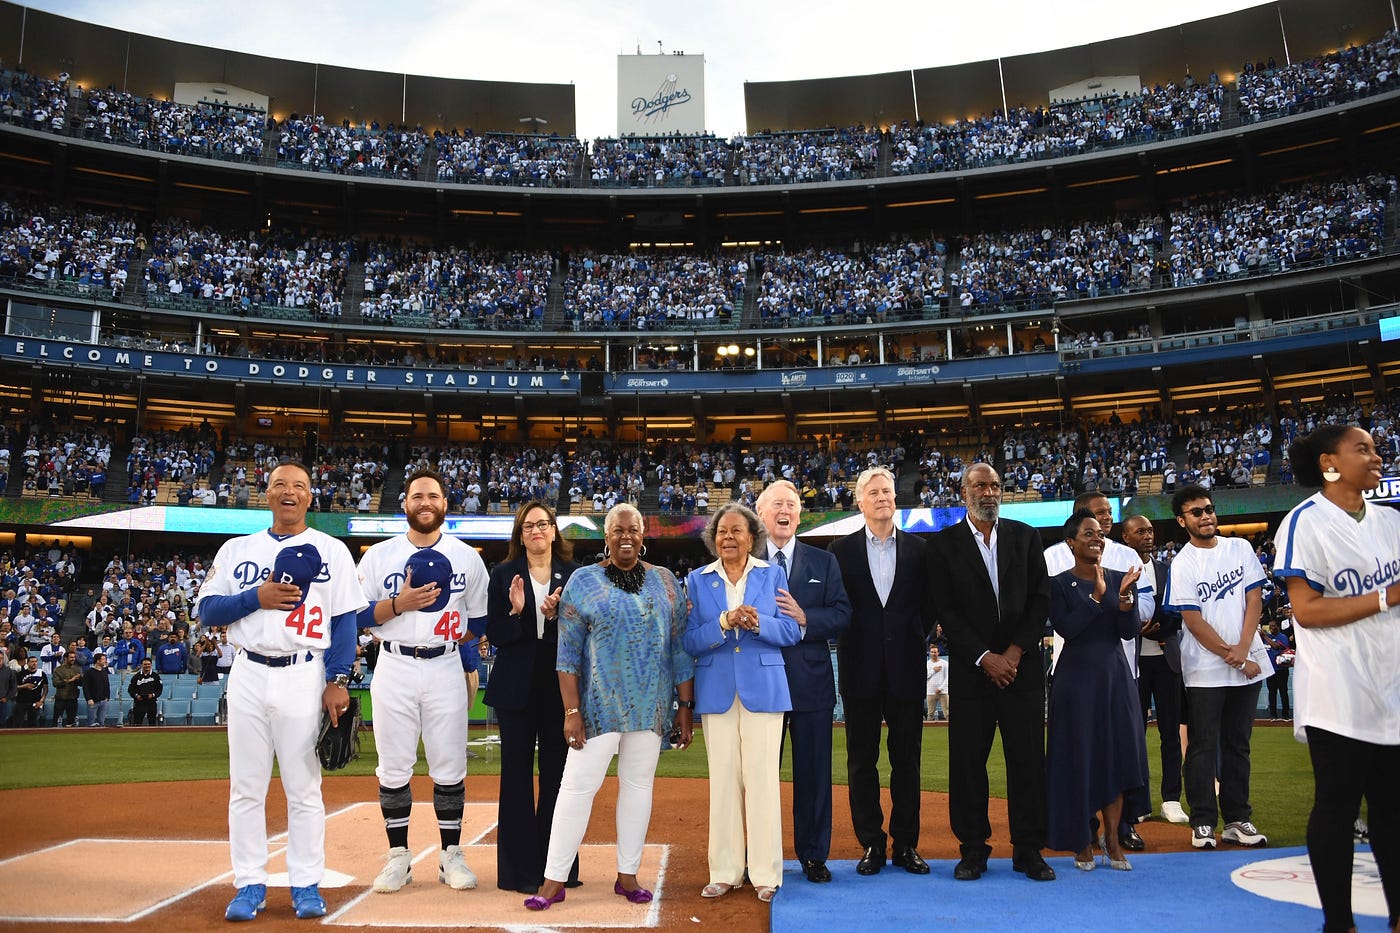 In his centennial year, Jackie Robinson is celebrated at Dodger Stadium